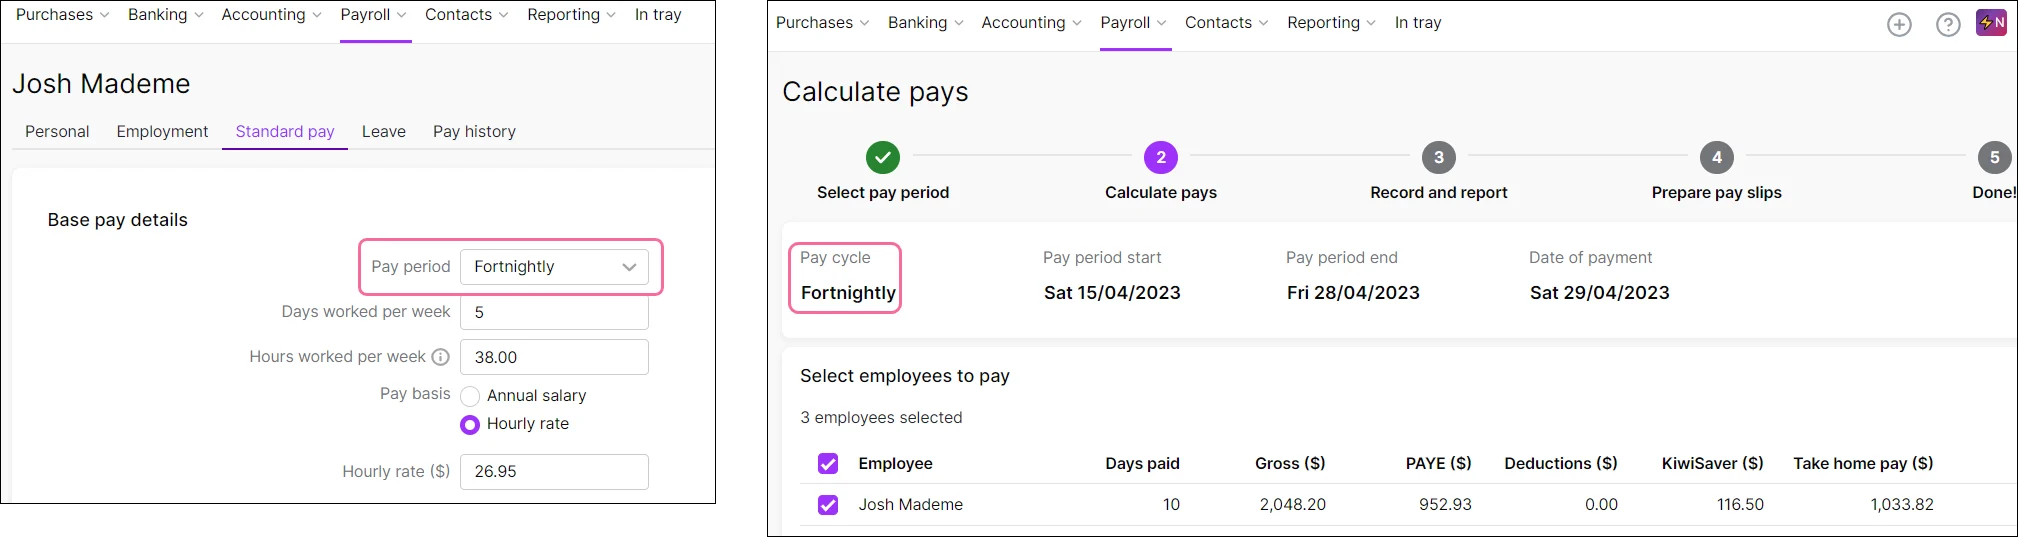 Employee Pay period must match pay run Pay cycle for the employee to appear